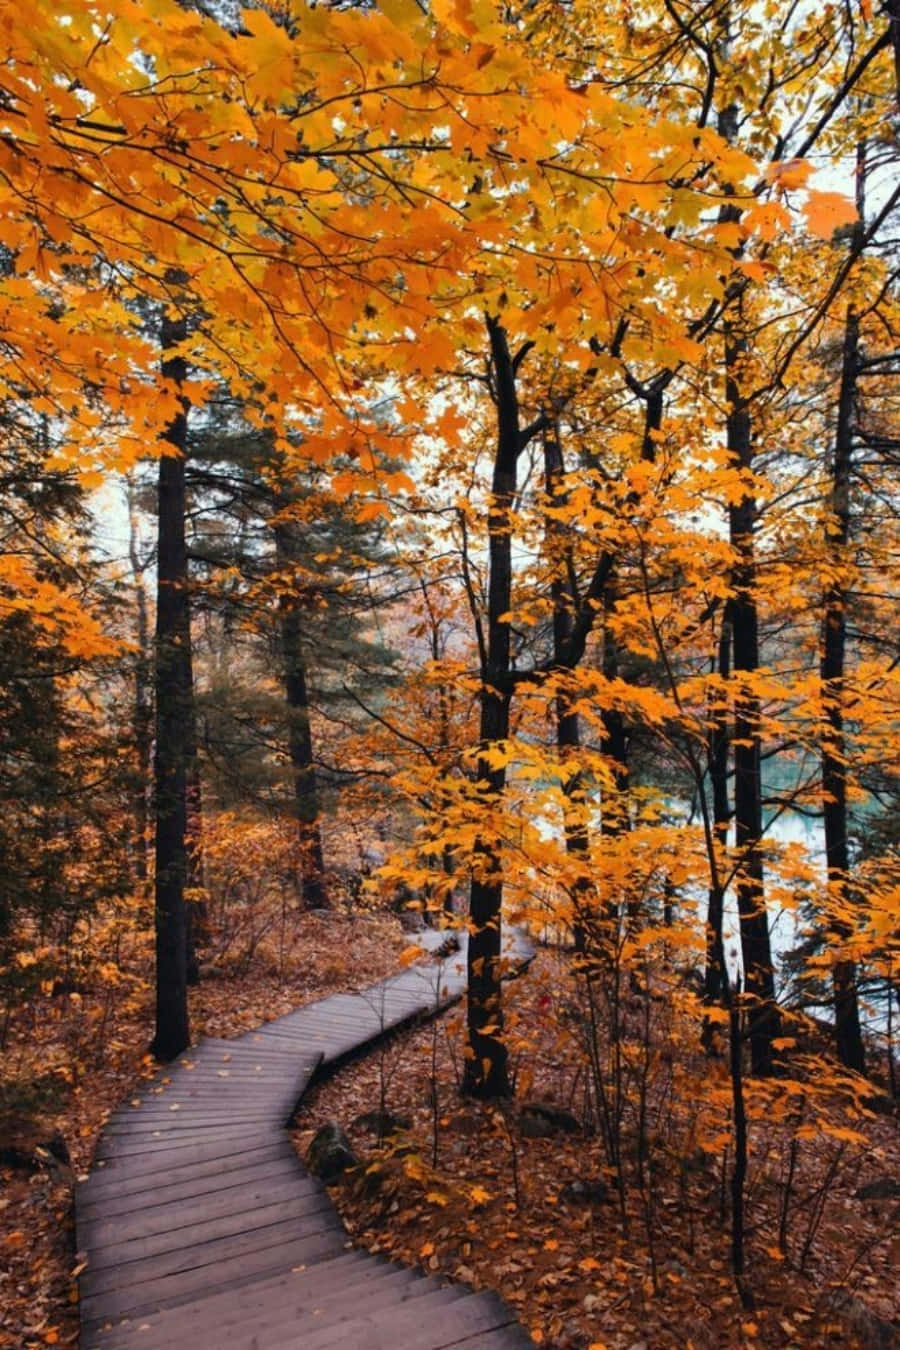 Enjoy the festive fall foliage in all its golden glory.